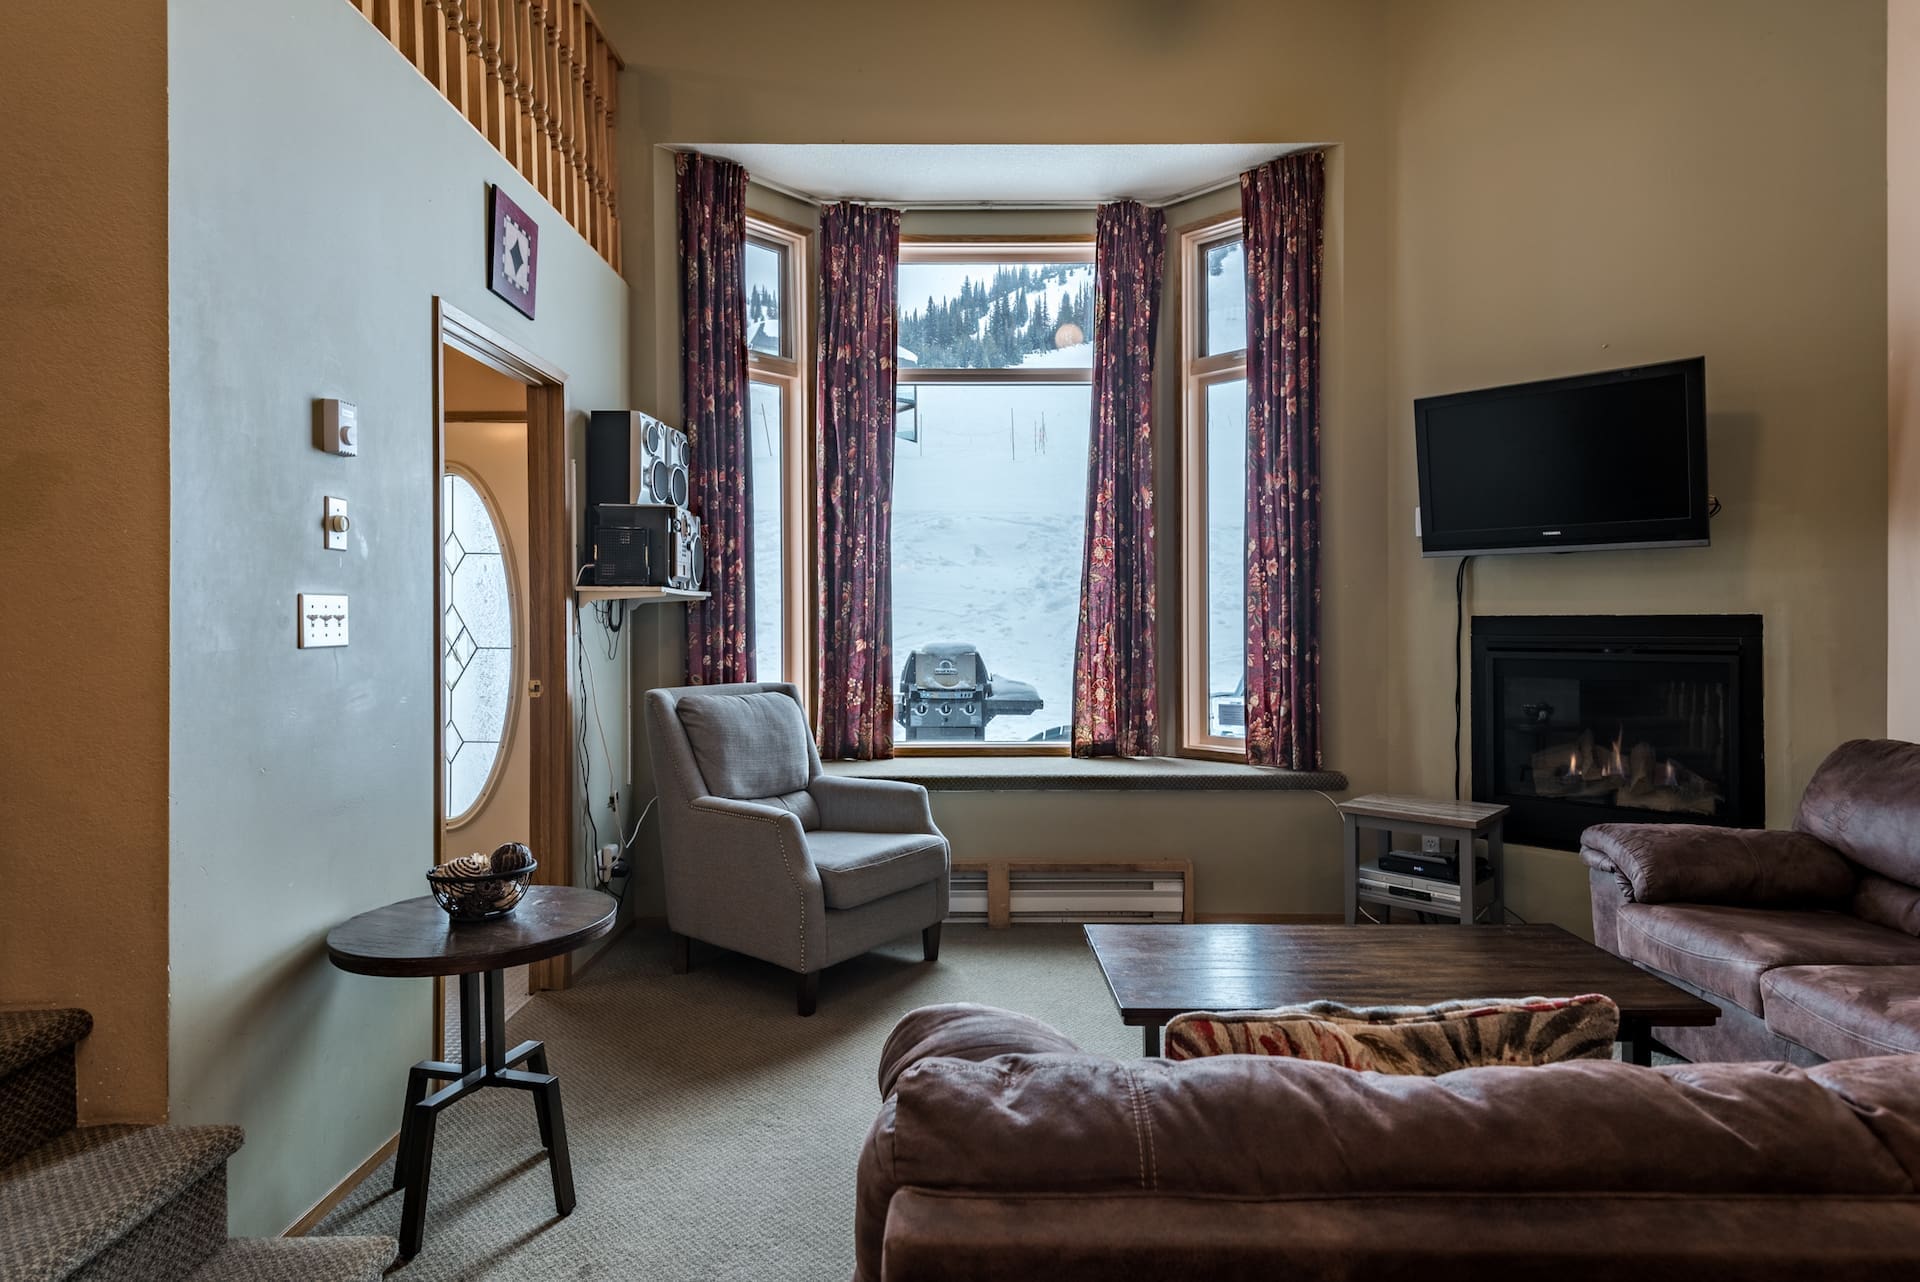 Family friendly private condo at the Pinnacles. Steps away from the village, ski in and out right from your door. Enjoy the private hot tub, BBQ on deck, and mountain views. Large open windows and it's pet friendly!